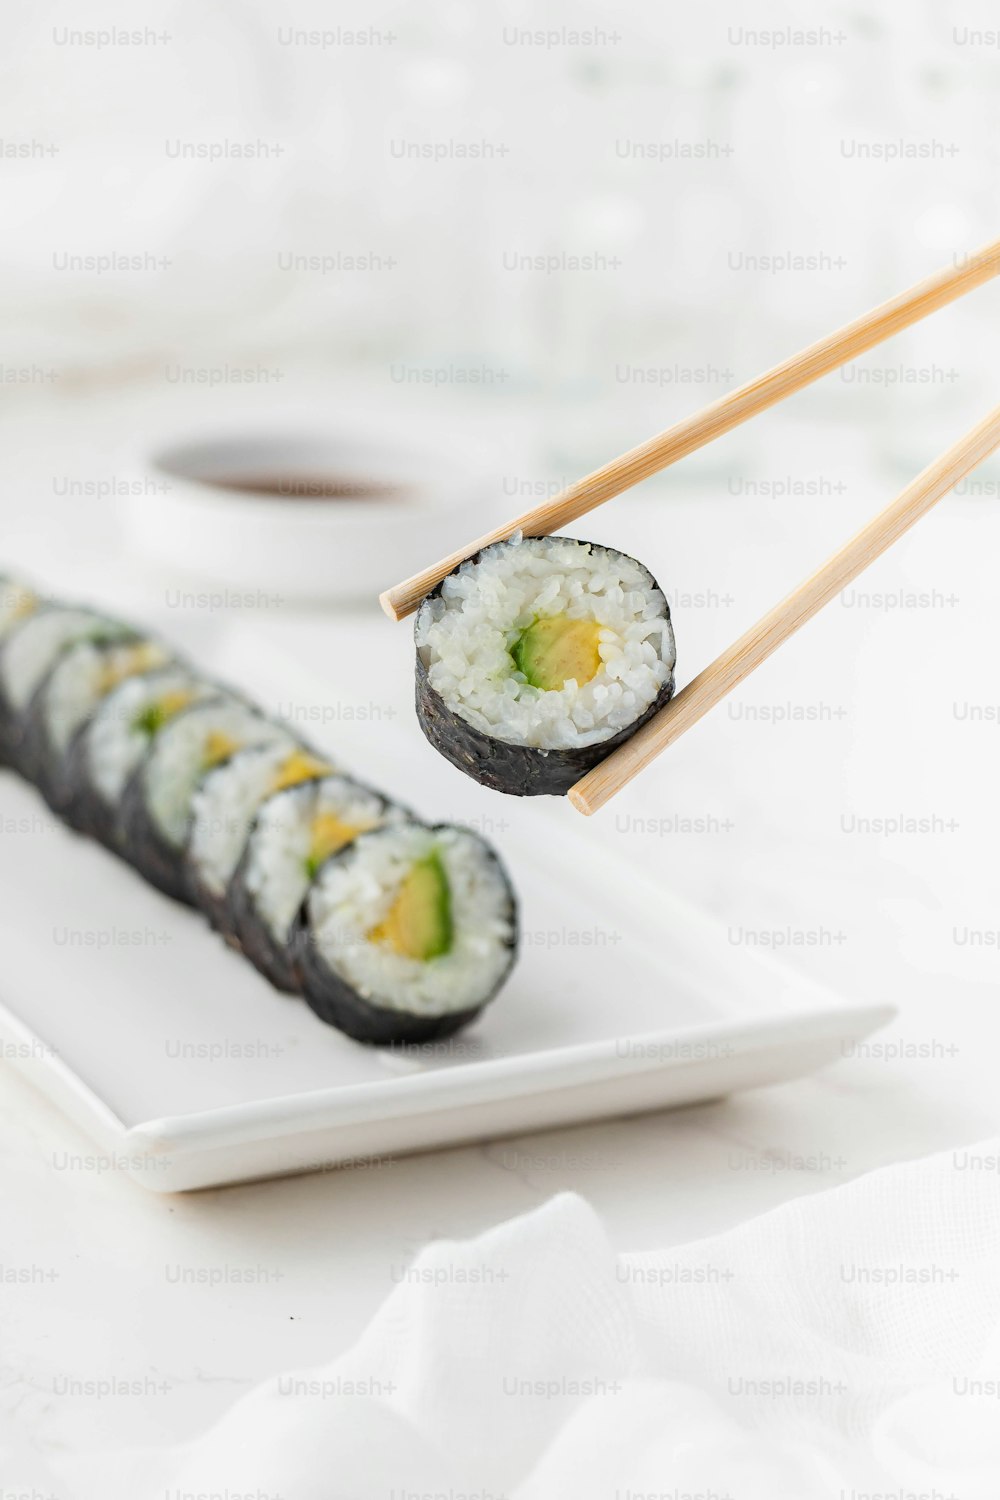 Sushi Roll Set On Image & Photo (Free Trial)